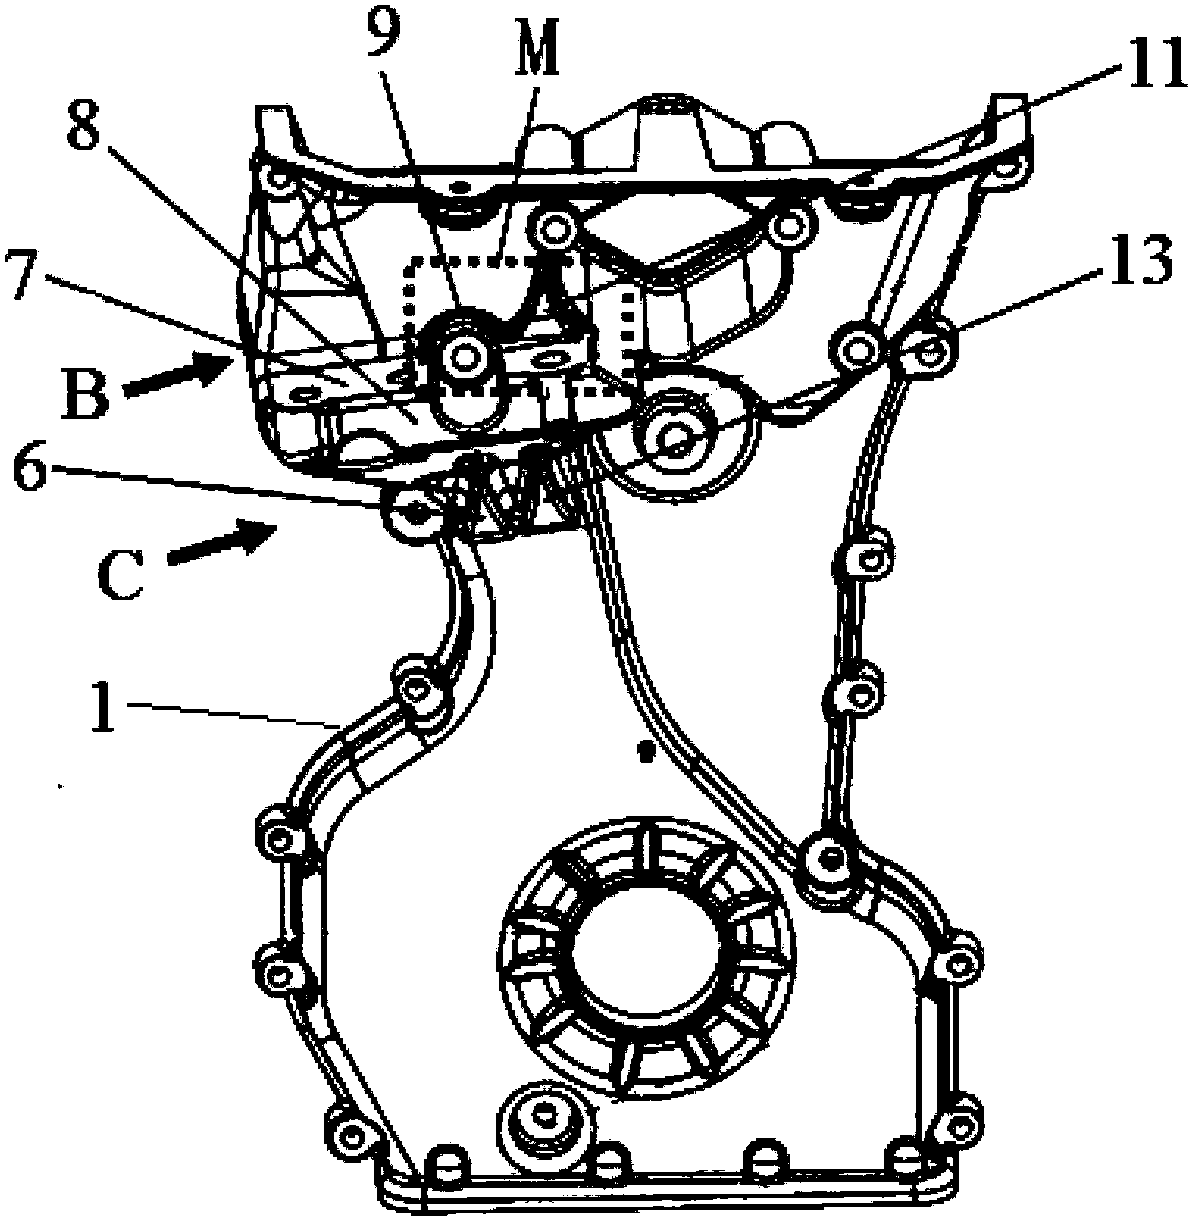 Motor front cover with hanging right support installation structure